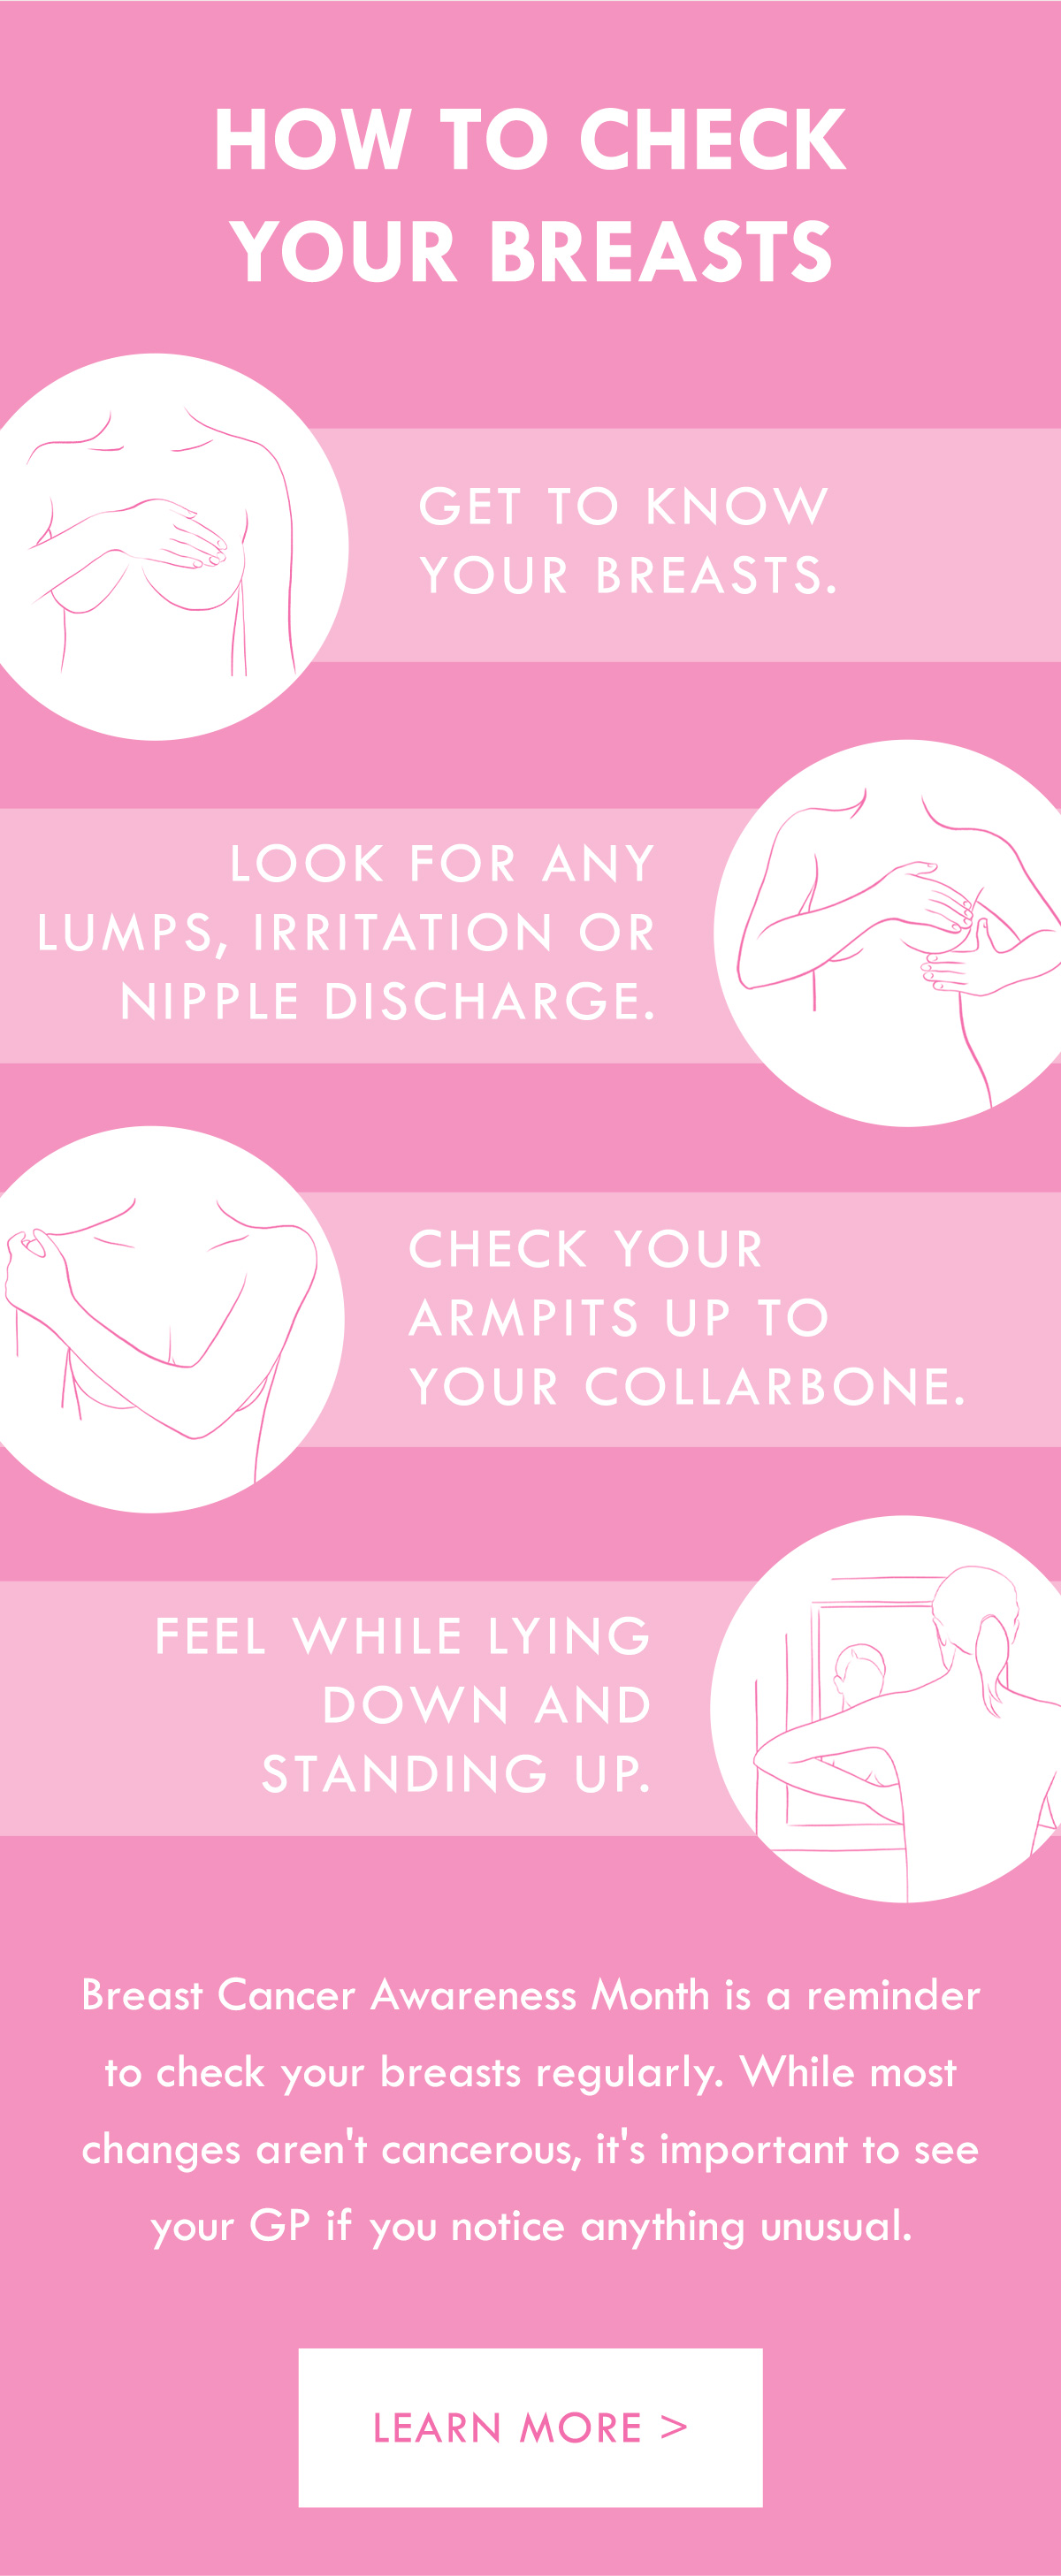 How to check your breasts. Learn more.